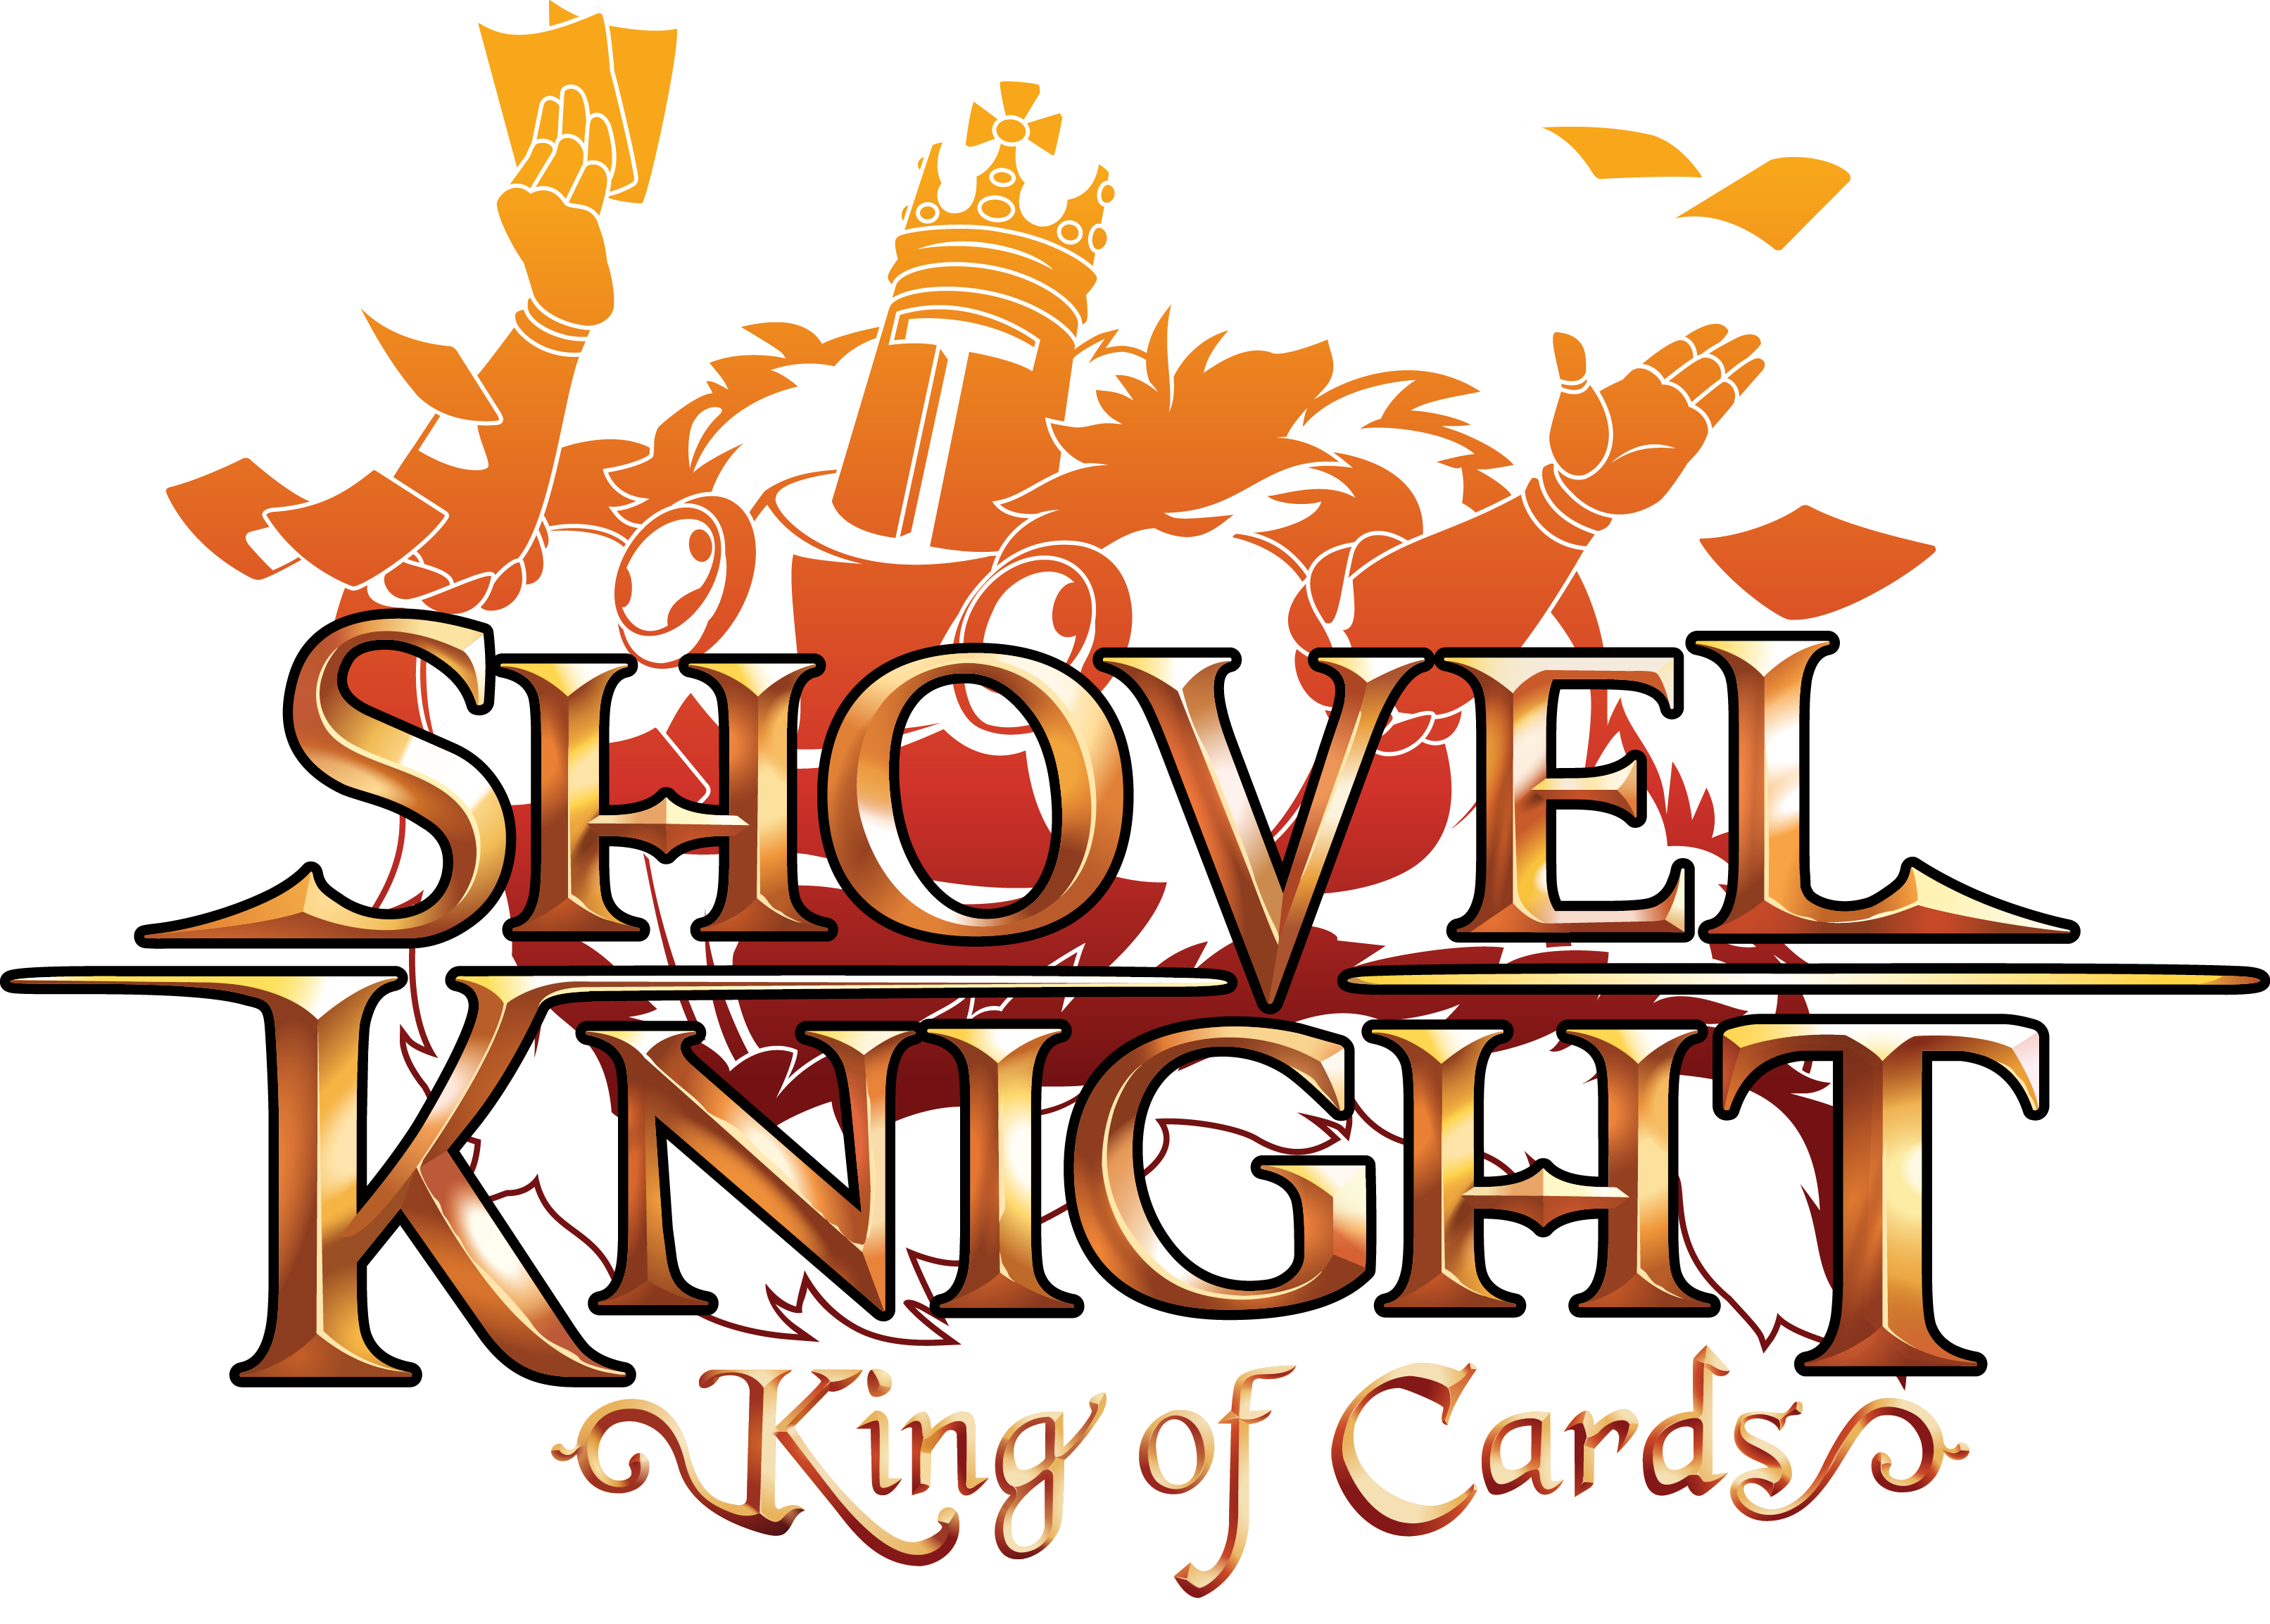 (100%) "King of Cards" (-) image 1